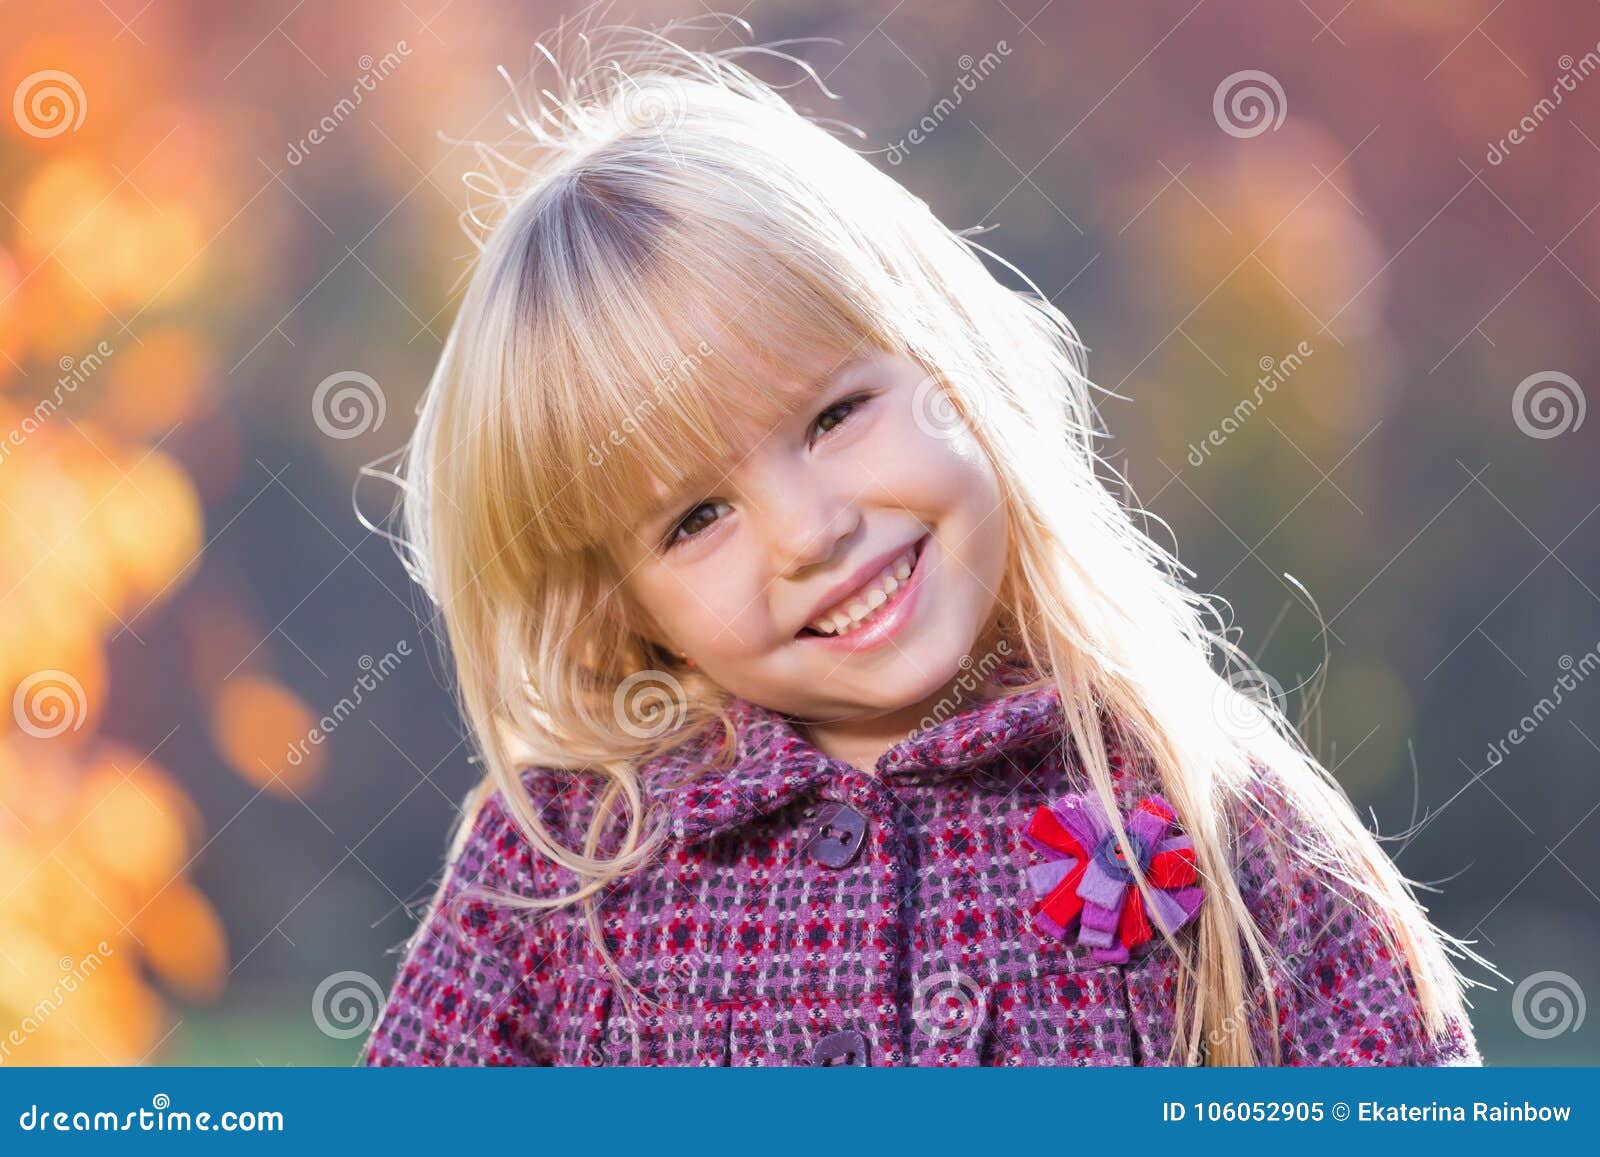 Beautiful Little Blonde Hair Girl Stock Image Image Of Activity